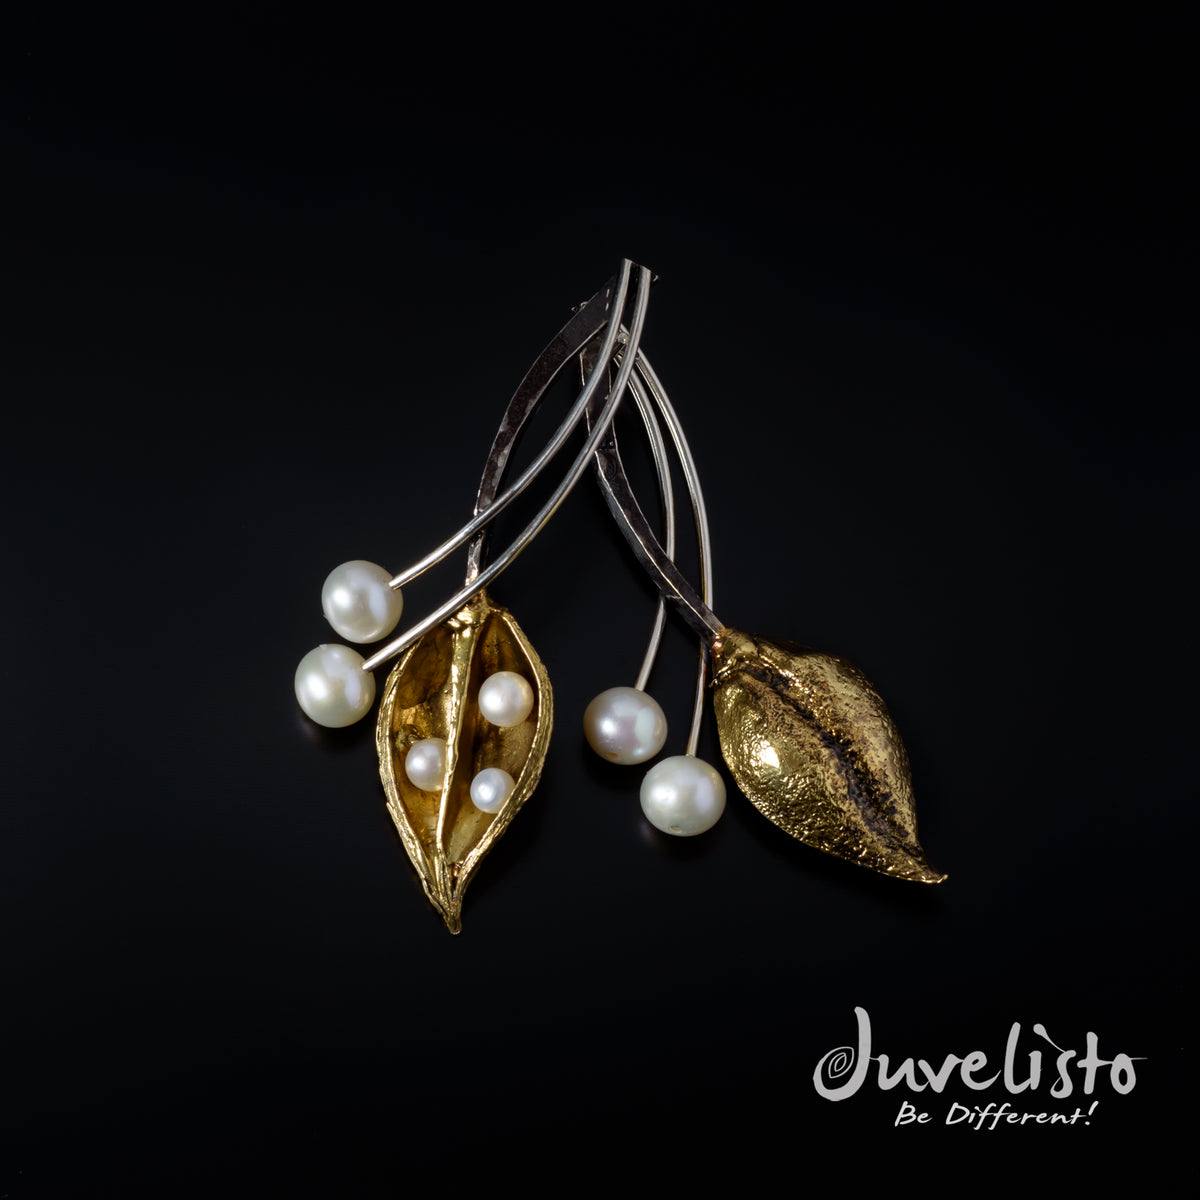 Juvelisto Design Bronze Empress Tree Pod Earrings with Fresh Water Pearls